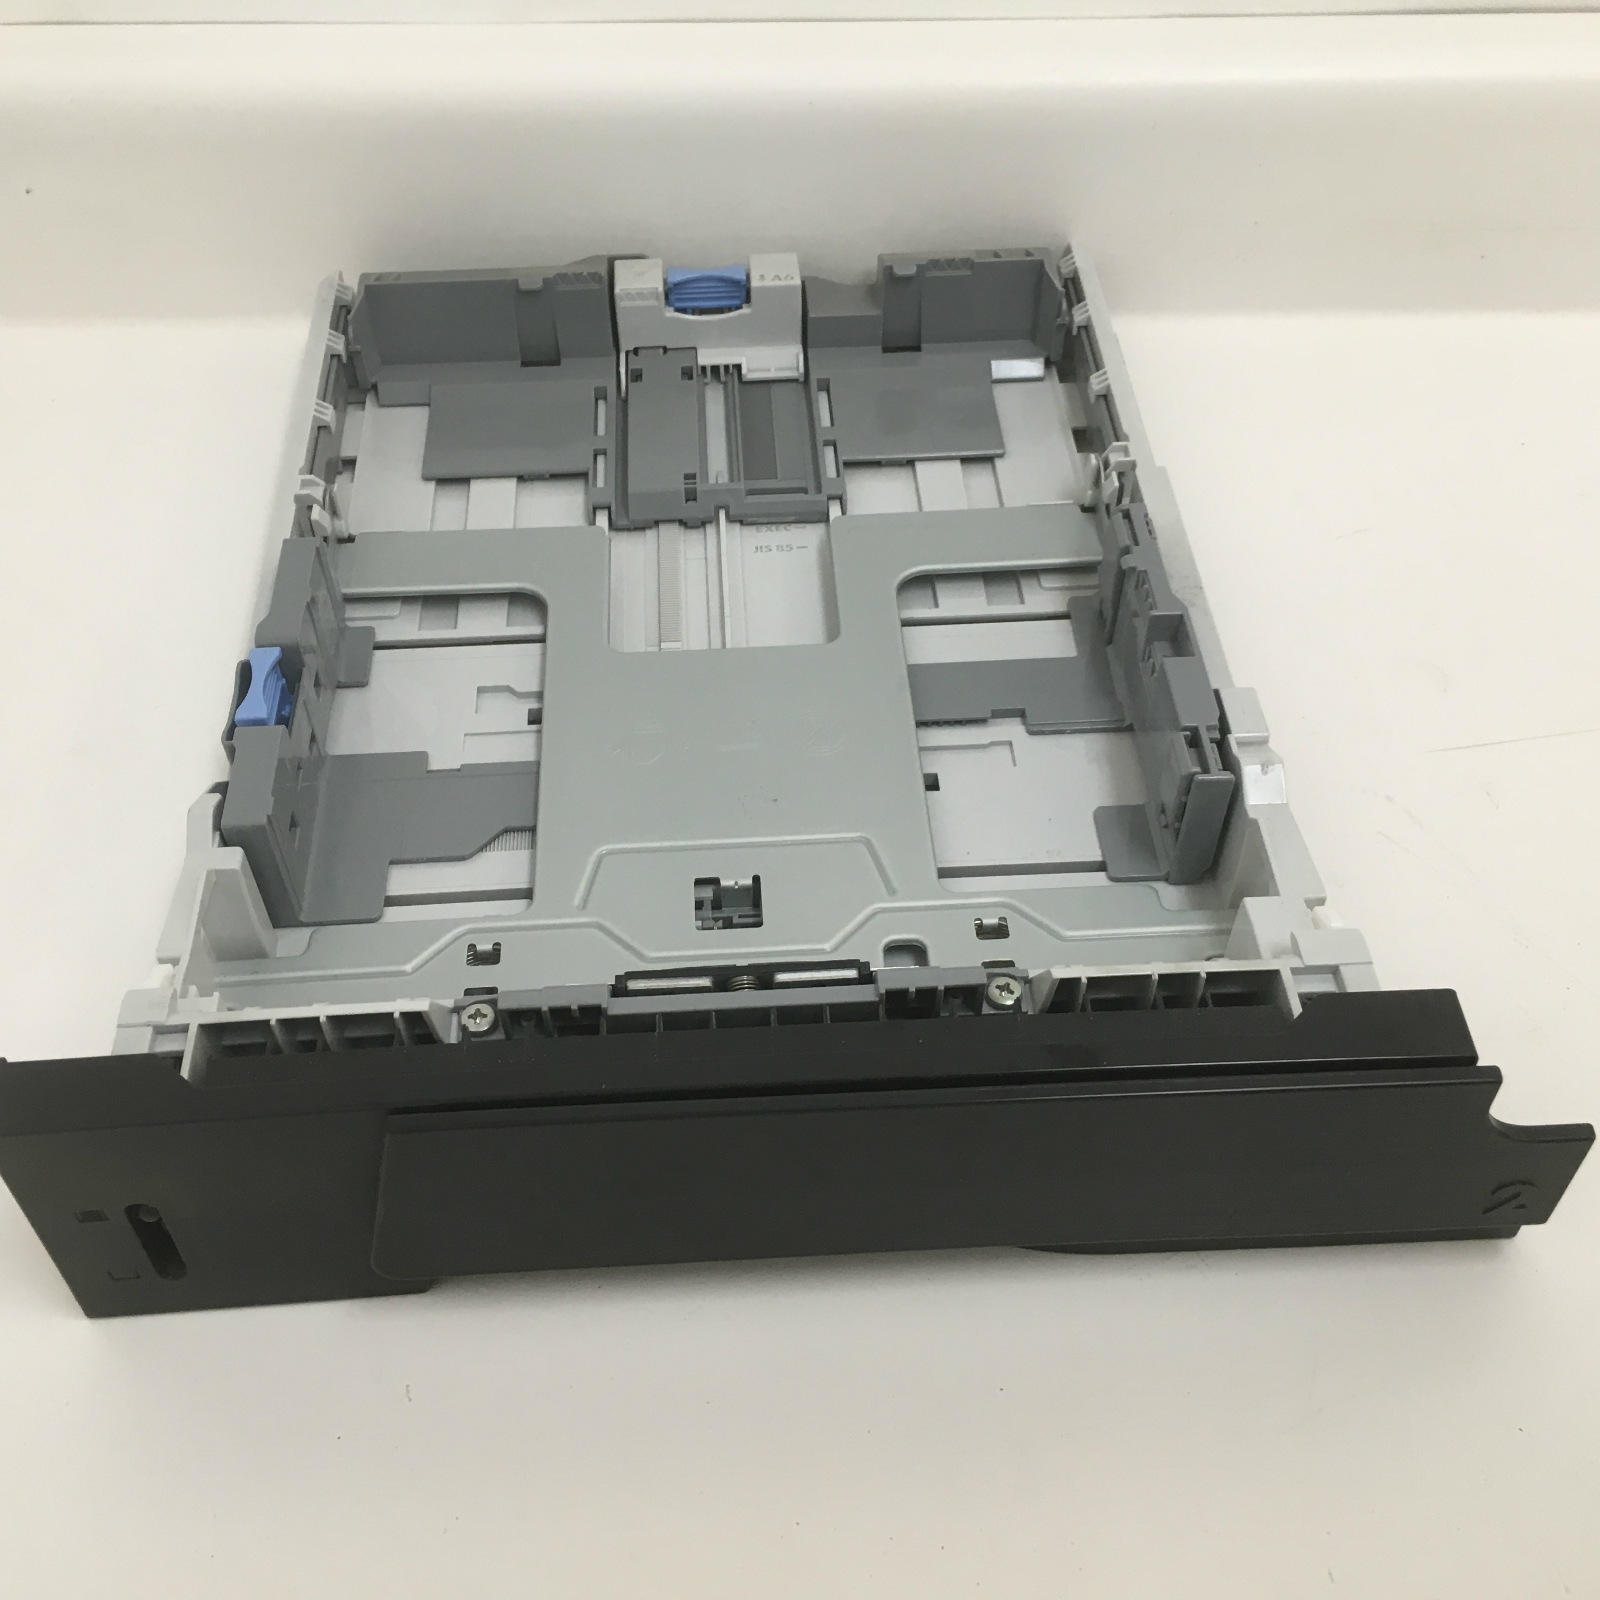 Primary image for HP LaserJet Pro 400 m401-dn m425 RM1-9137 RC2-6106 Printer Paper Cassette Tray 2